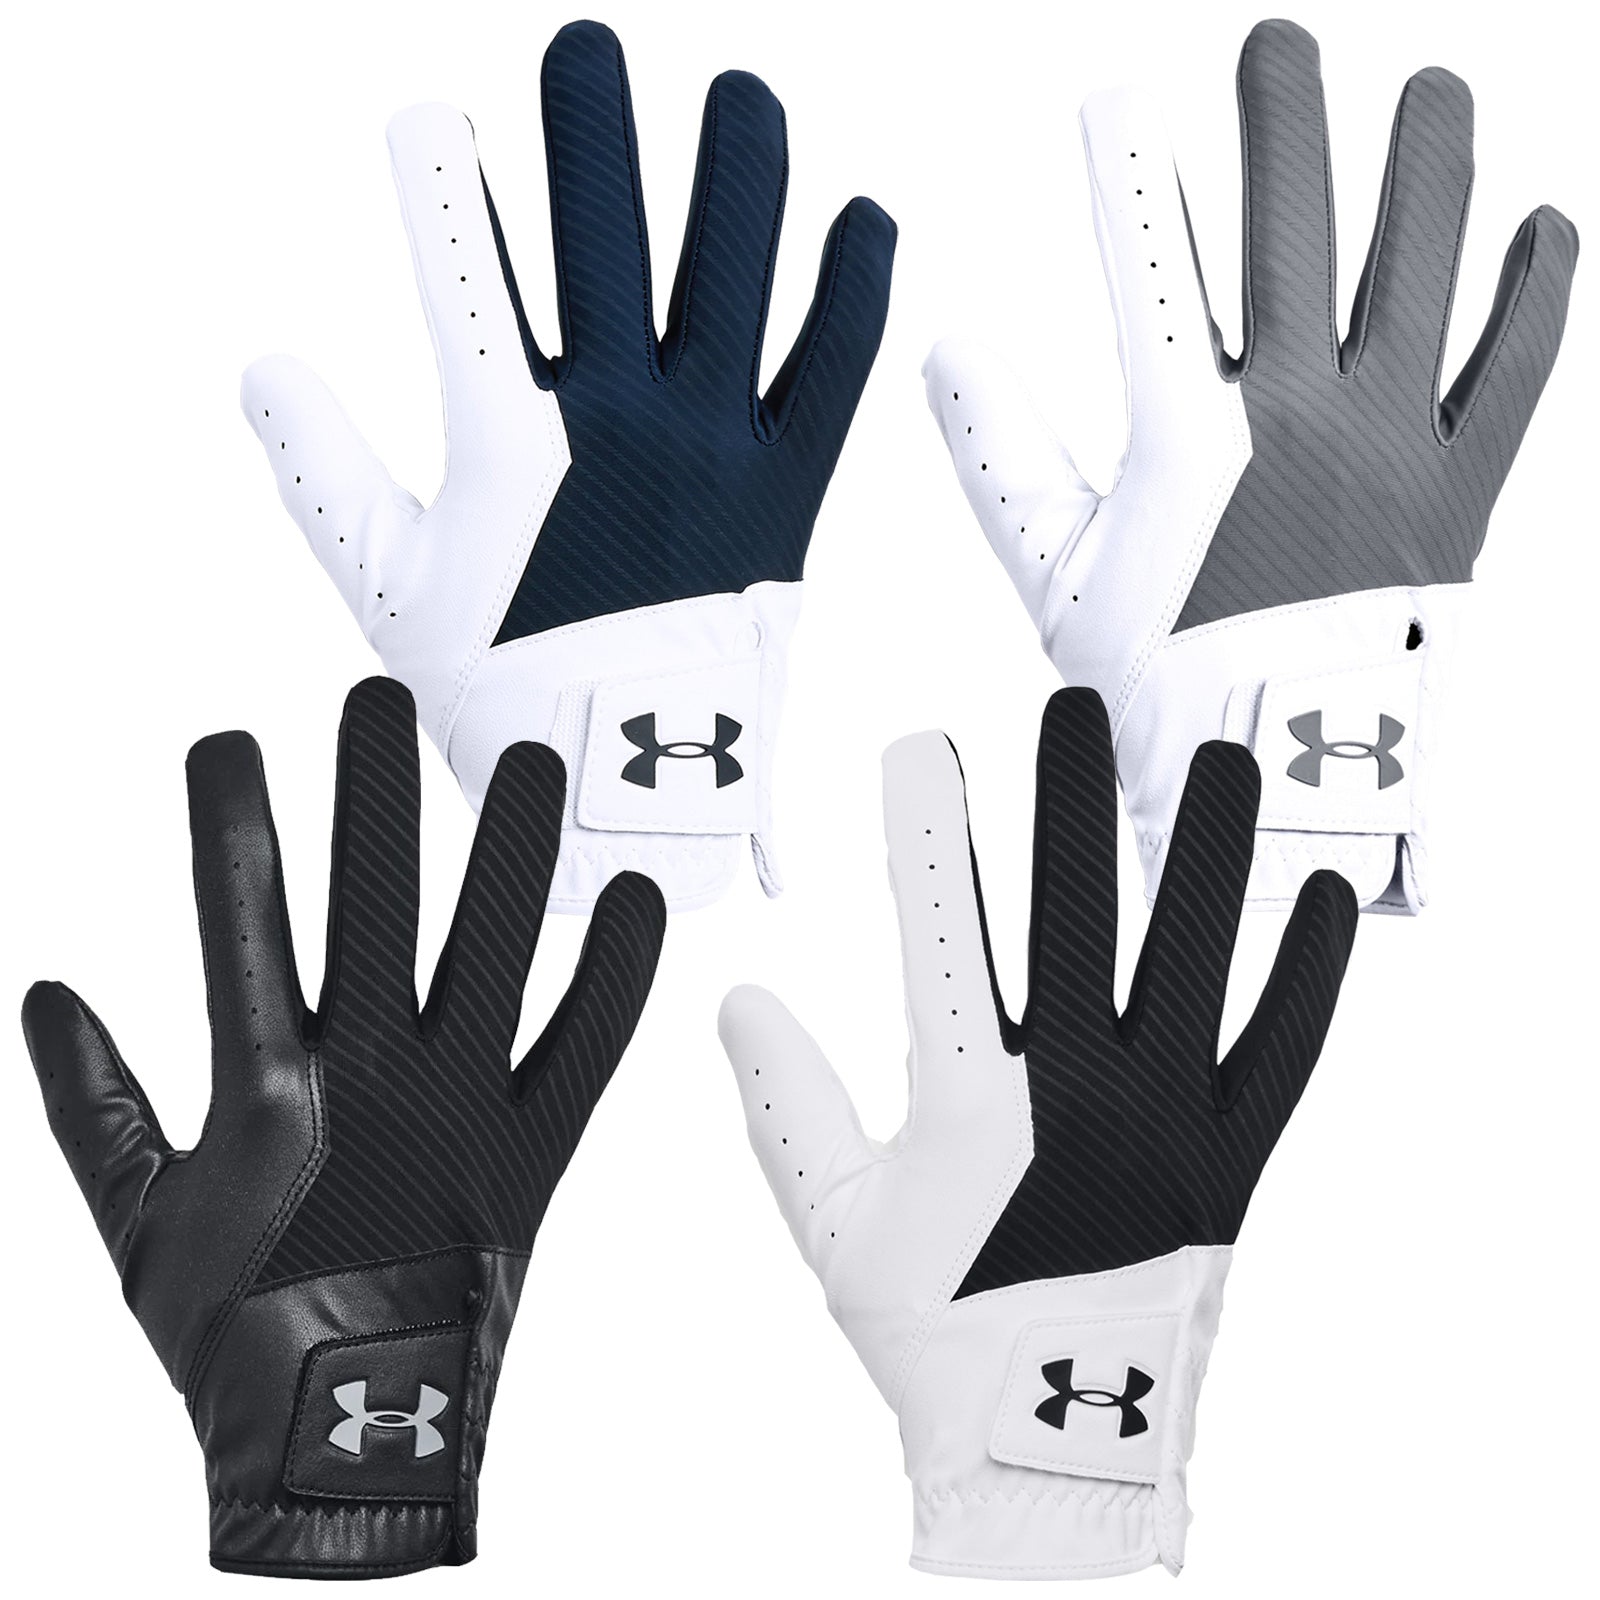 Under Armour Mens Medal RIGHT Hand Golf Glove